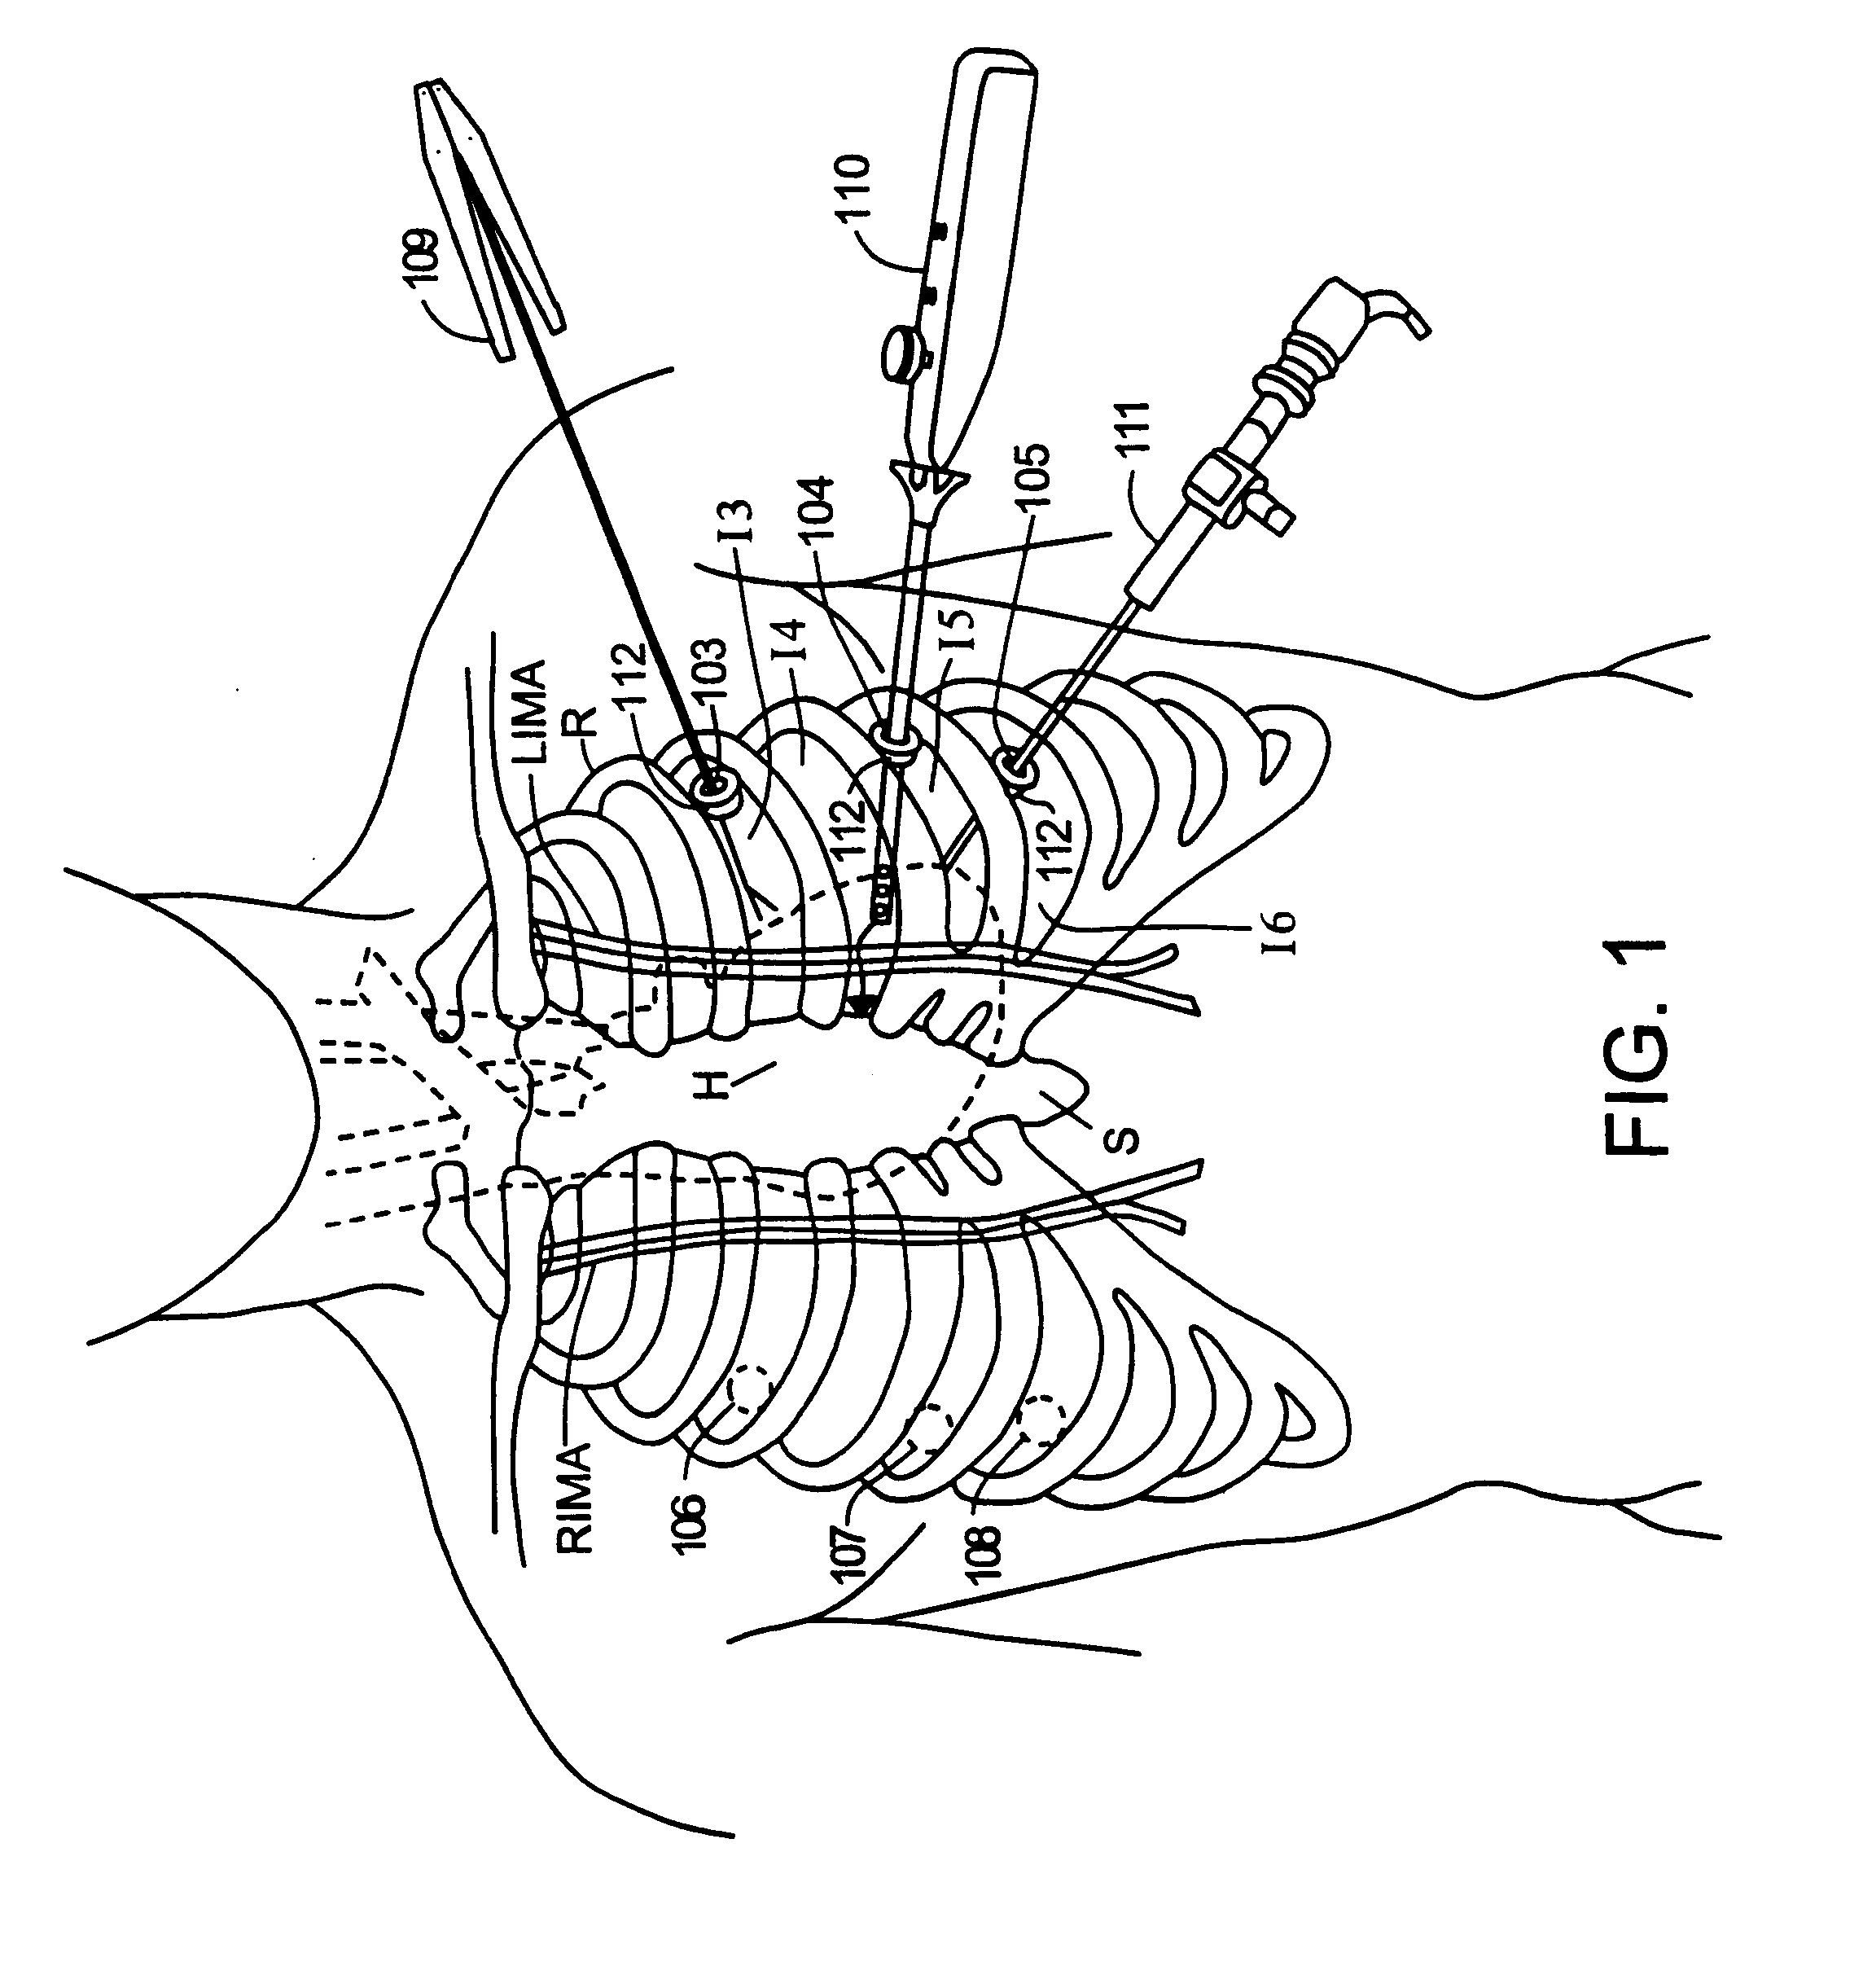 Devices and methods for port-access multivessel coronary artery bypass surgery